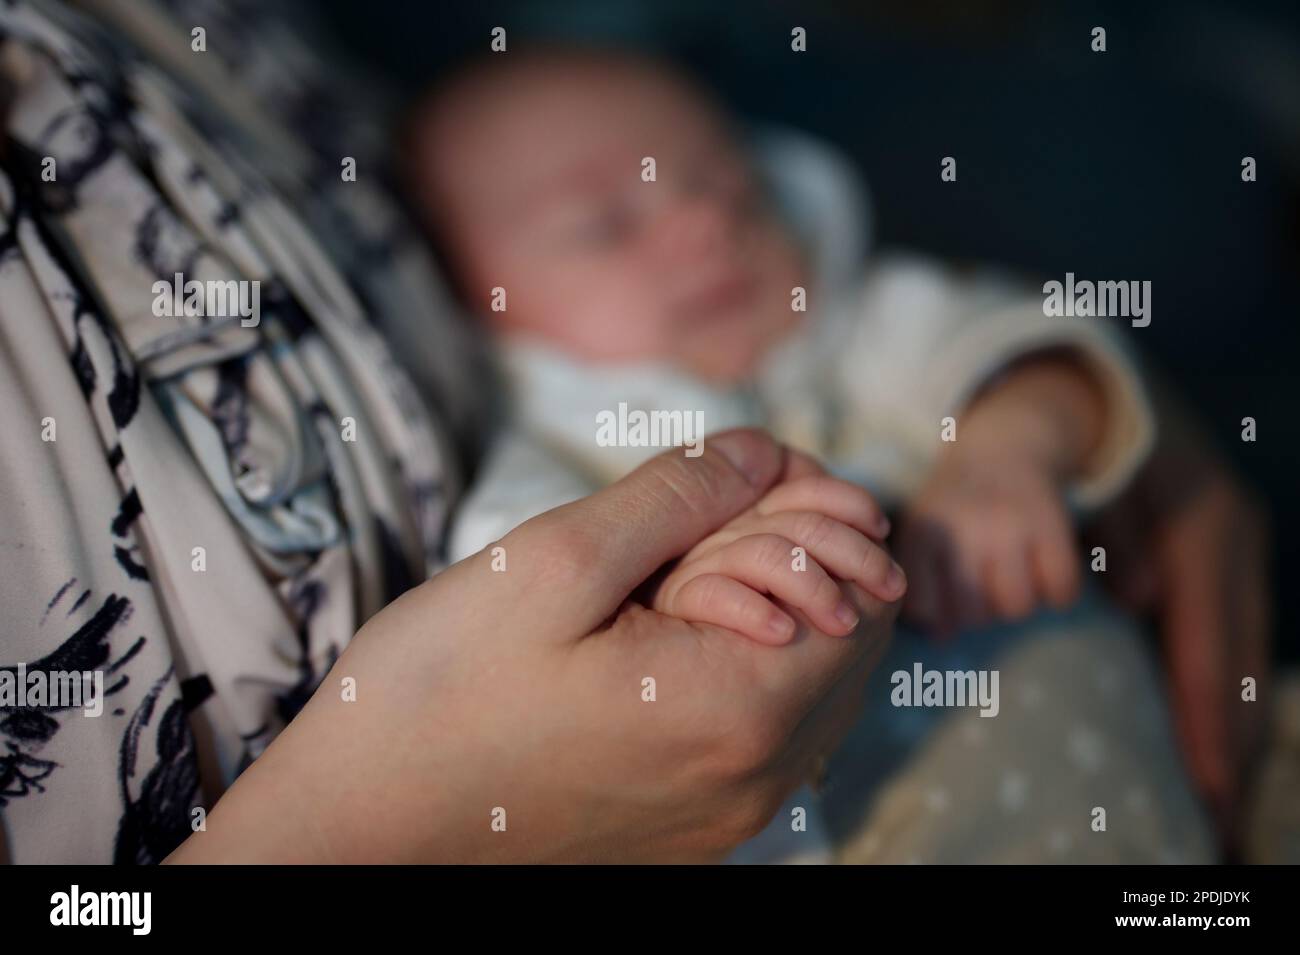 Closeup of newborn baby's hand holding mother's finger Stock Photo